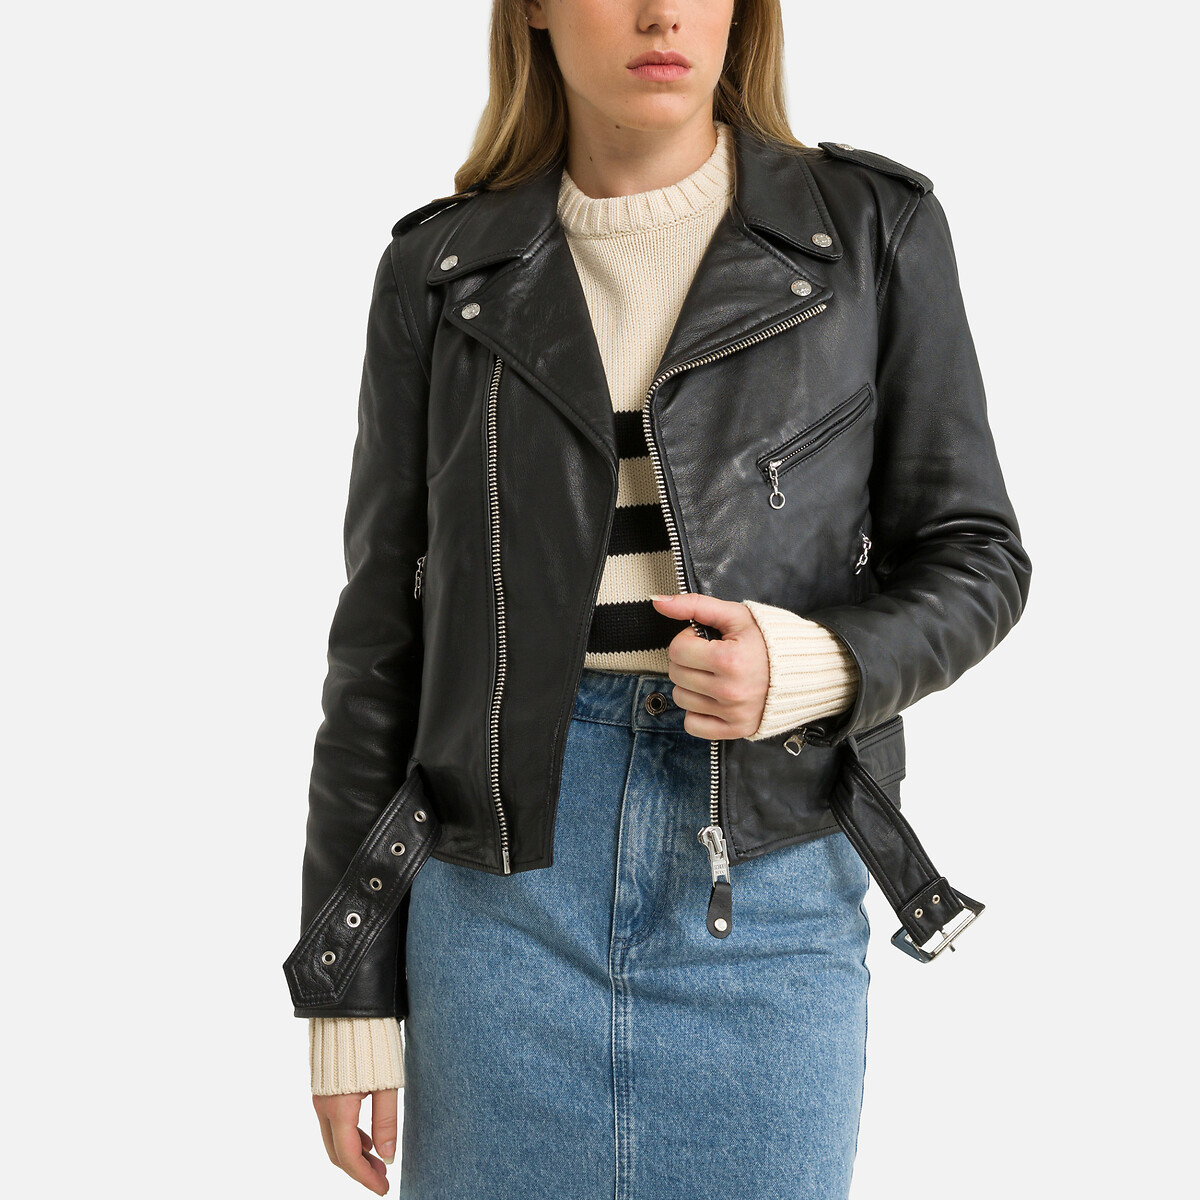 LCW8600 Leather Biker Jacket with Pockets